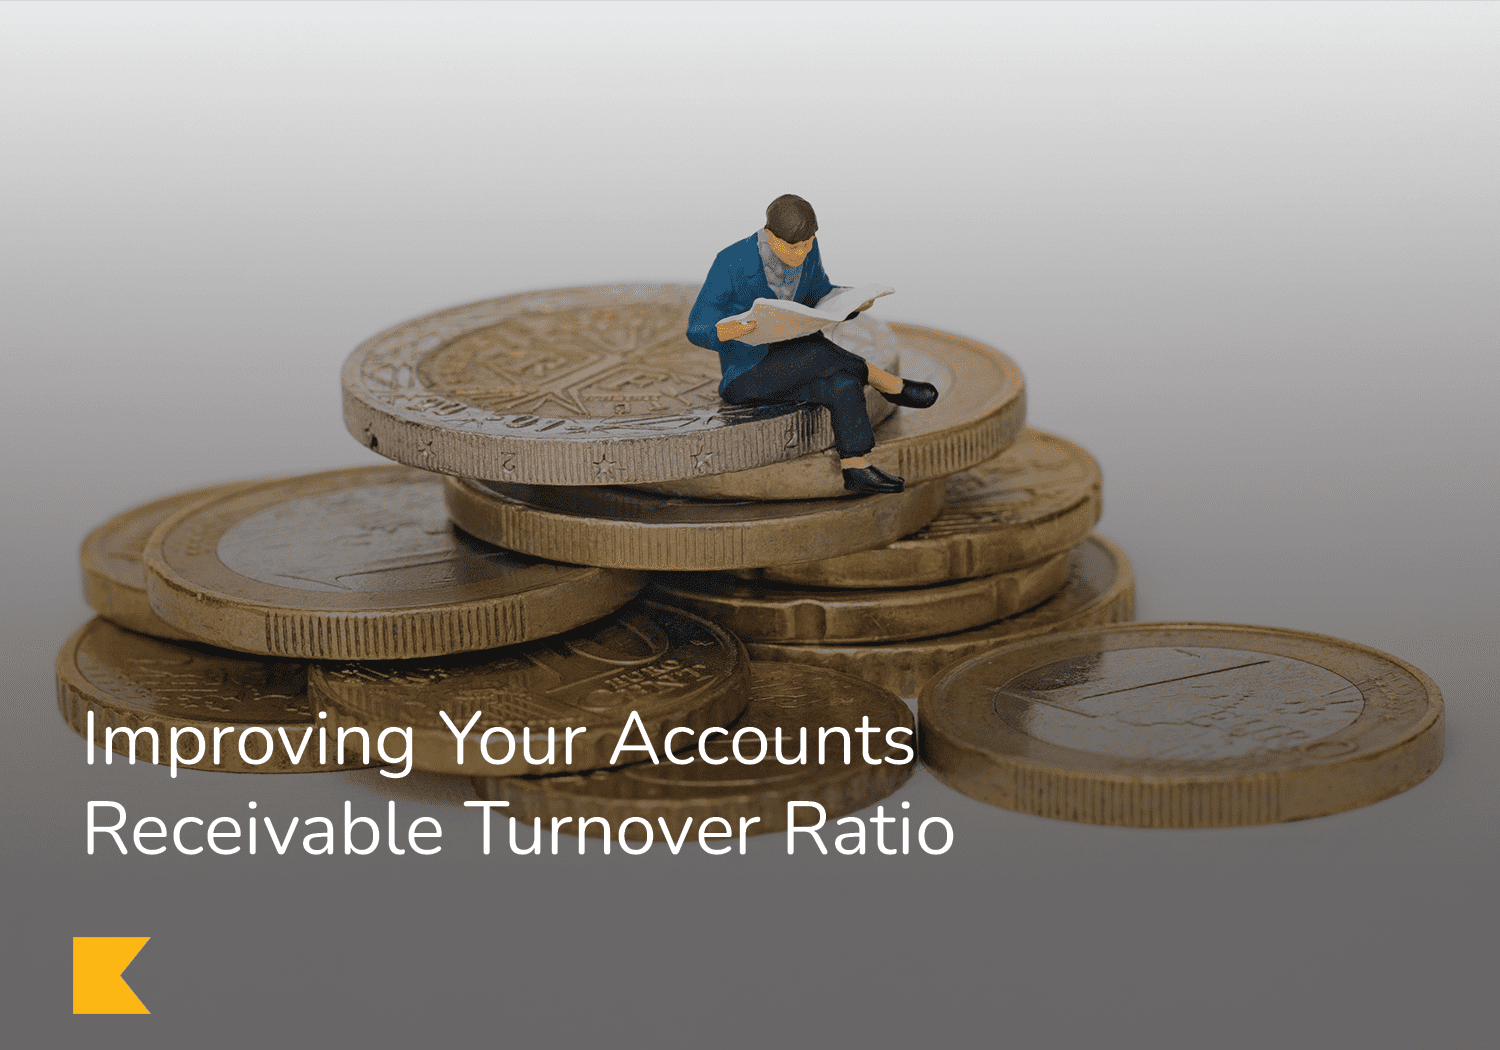 Improving Your Accounts Receivable Turnover Ratio